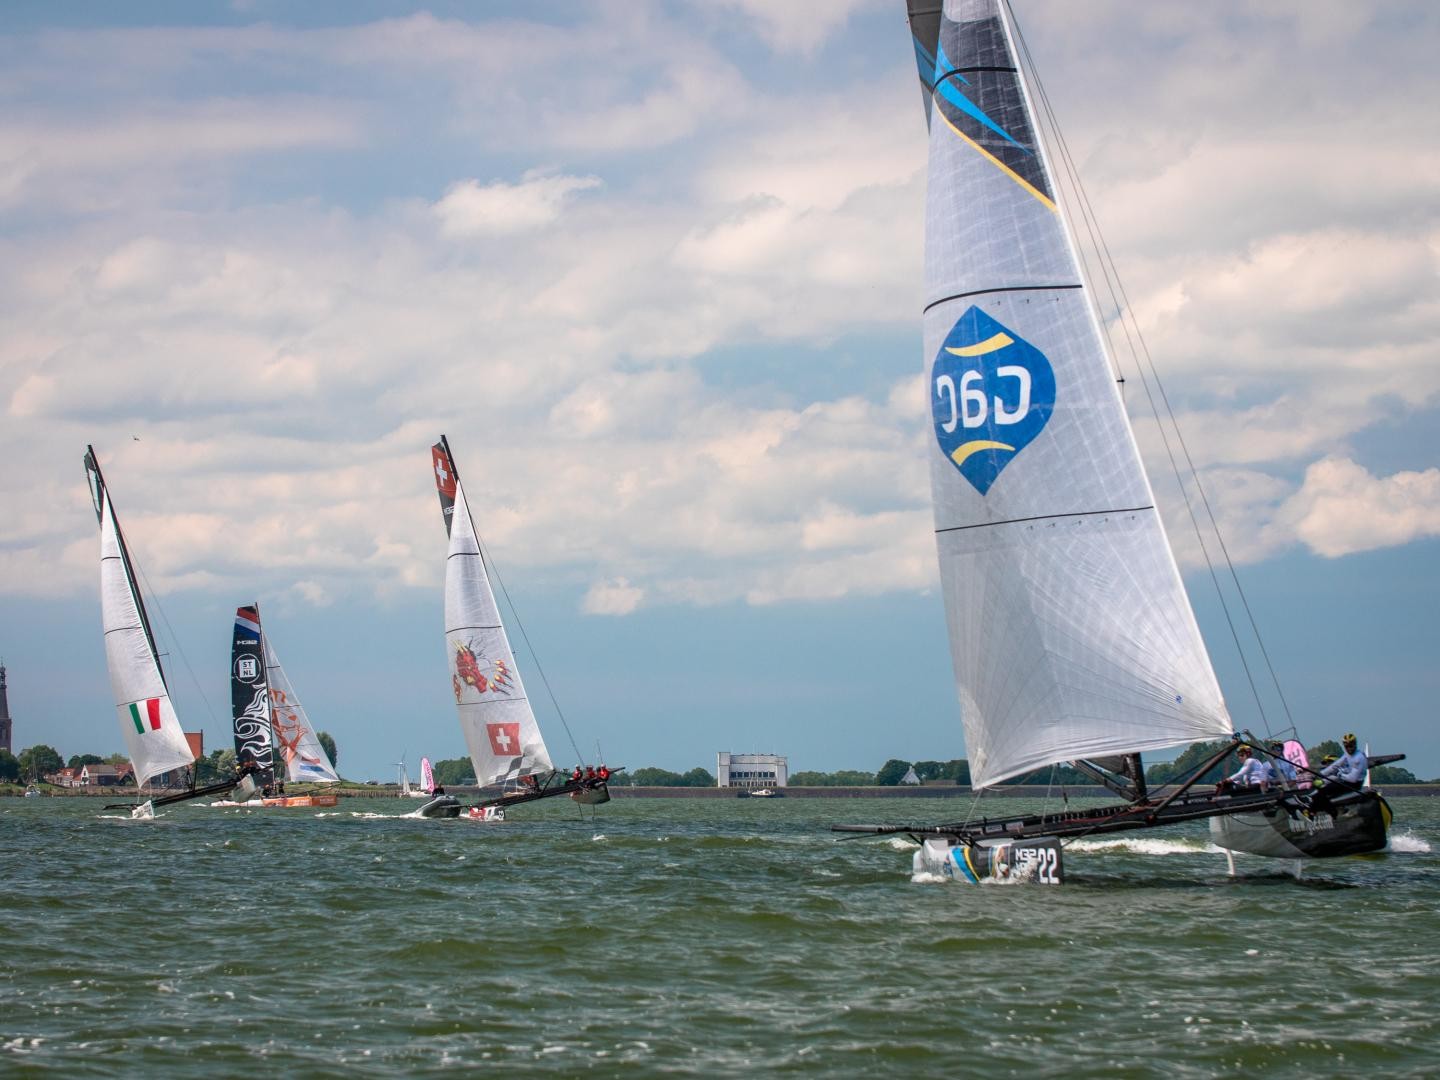  Medemblik M32 podium wide open going into final day